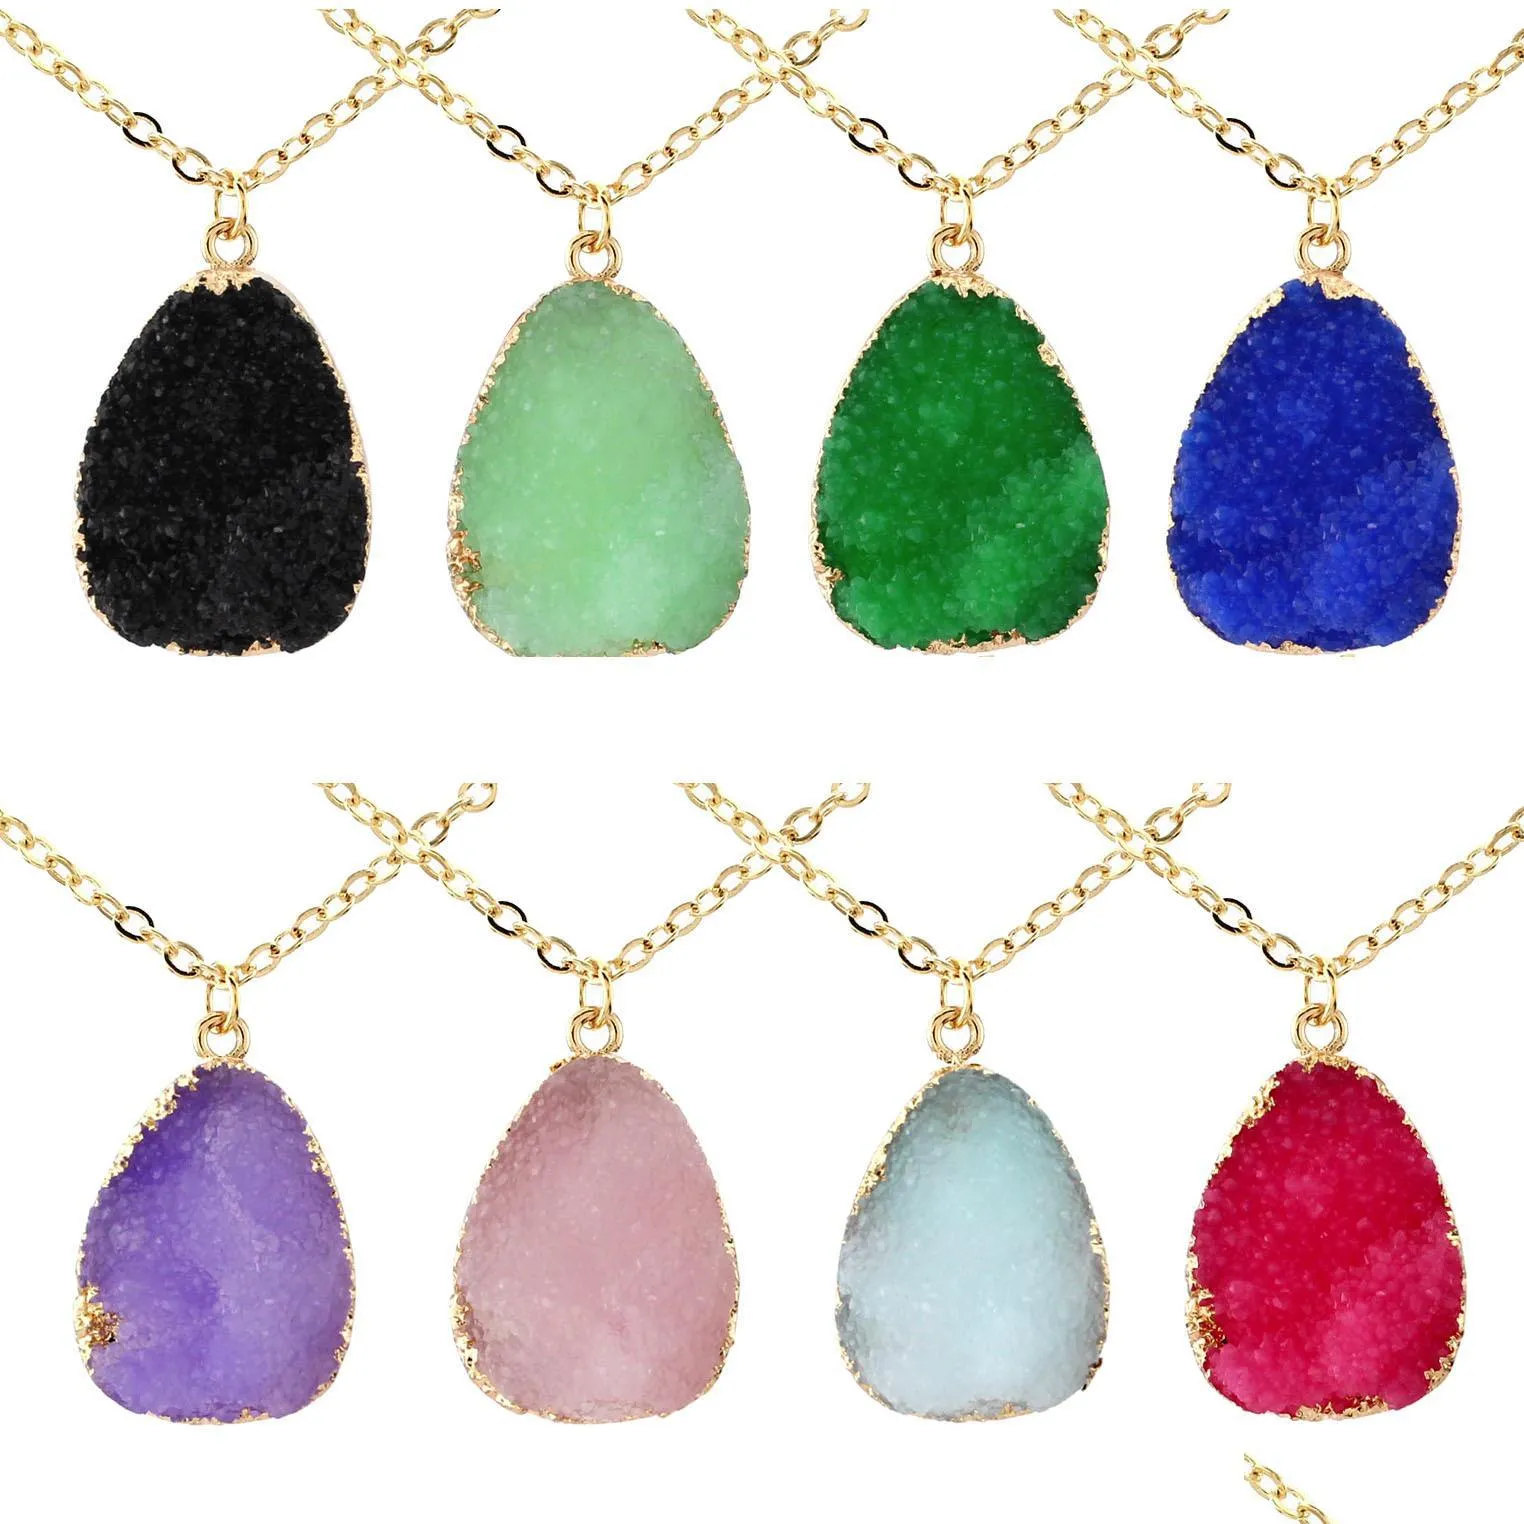 Pendant Necklaces Irregar Resin Stone Druzy Necklaces Gold Plated Link Chain Geometry Stones Pendant Necklace For Elegant Women Girl Dhlmf